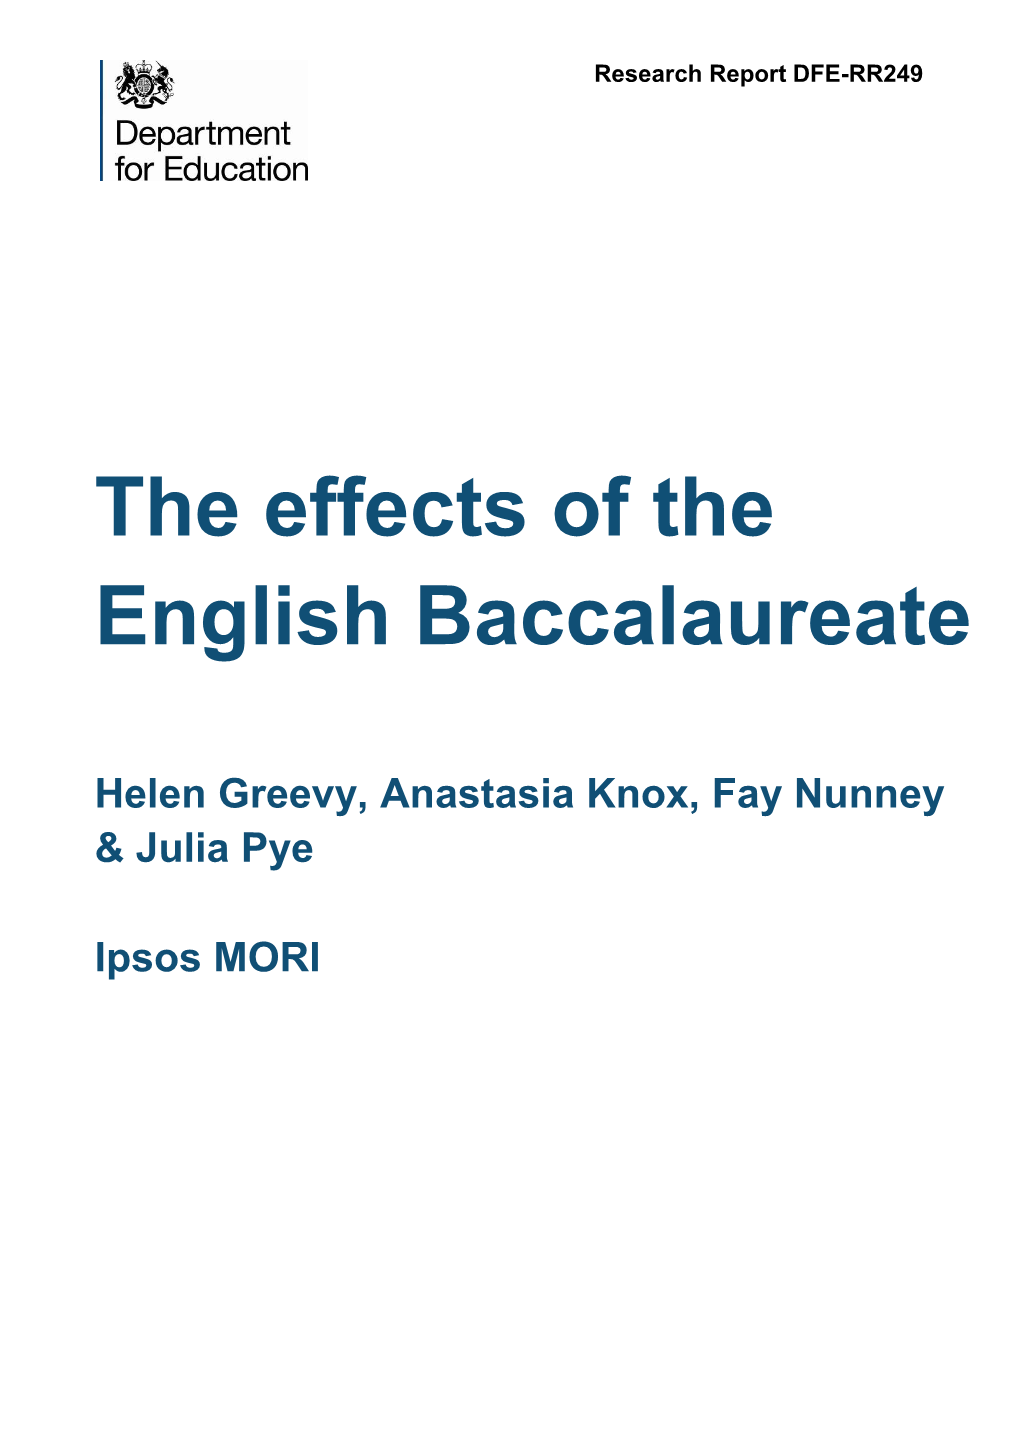 Effects of the English Baccalaureate